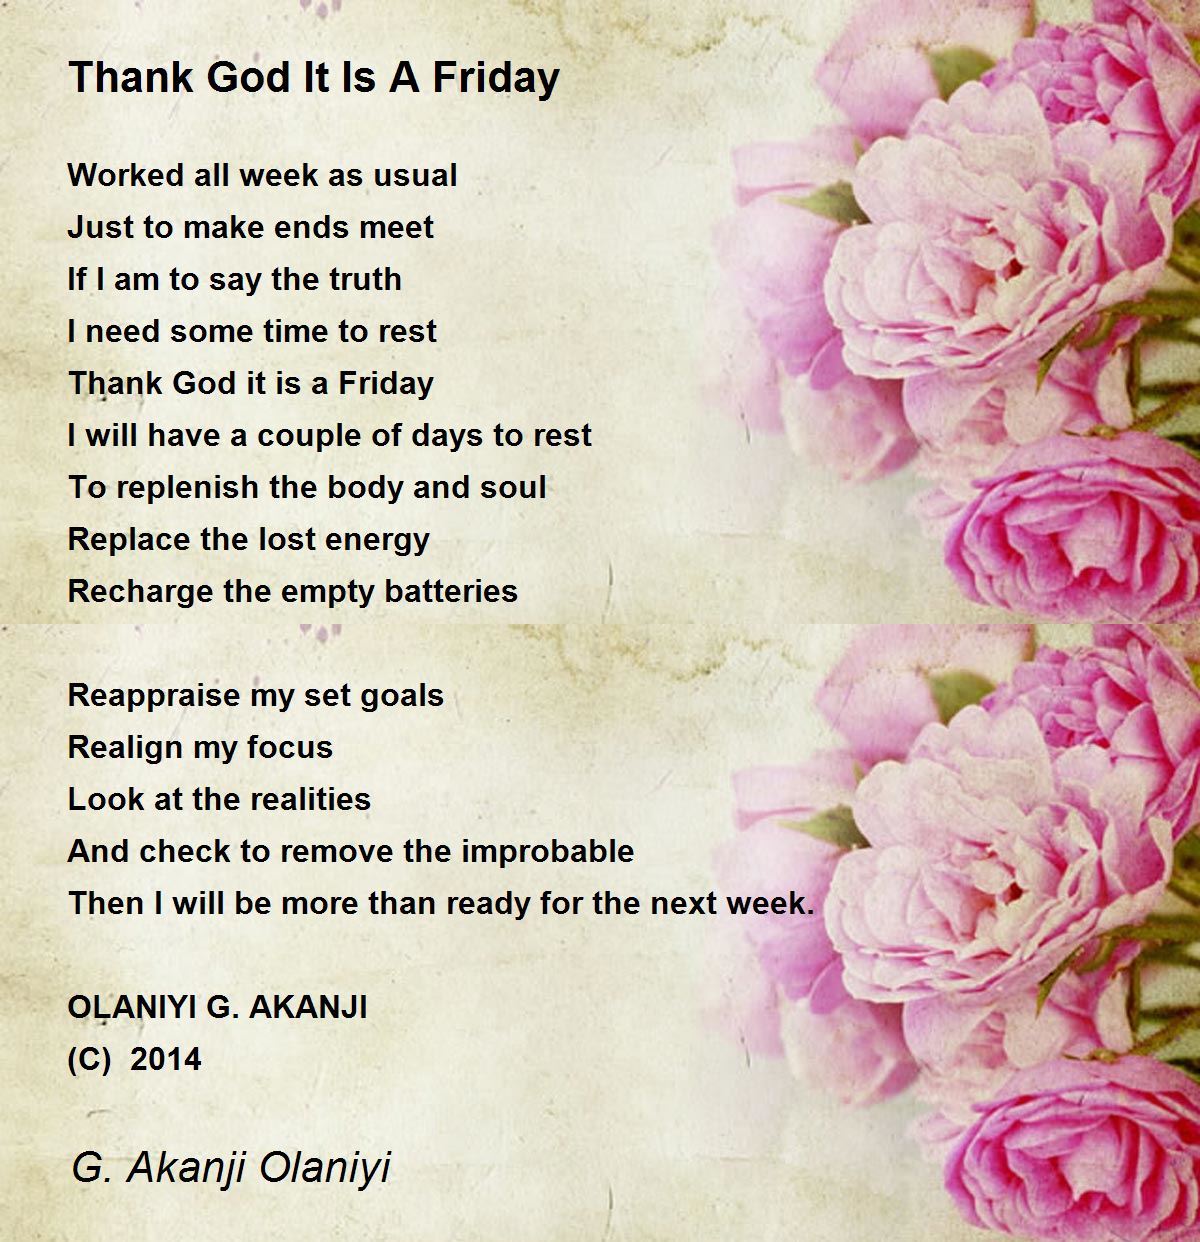 Thank God It Is A Friday - Thank God It Is A Friday Poem by G ...